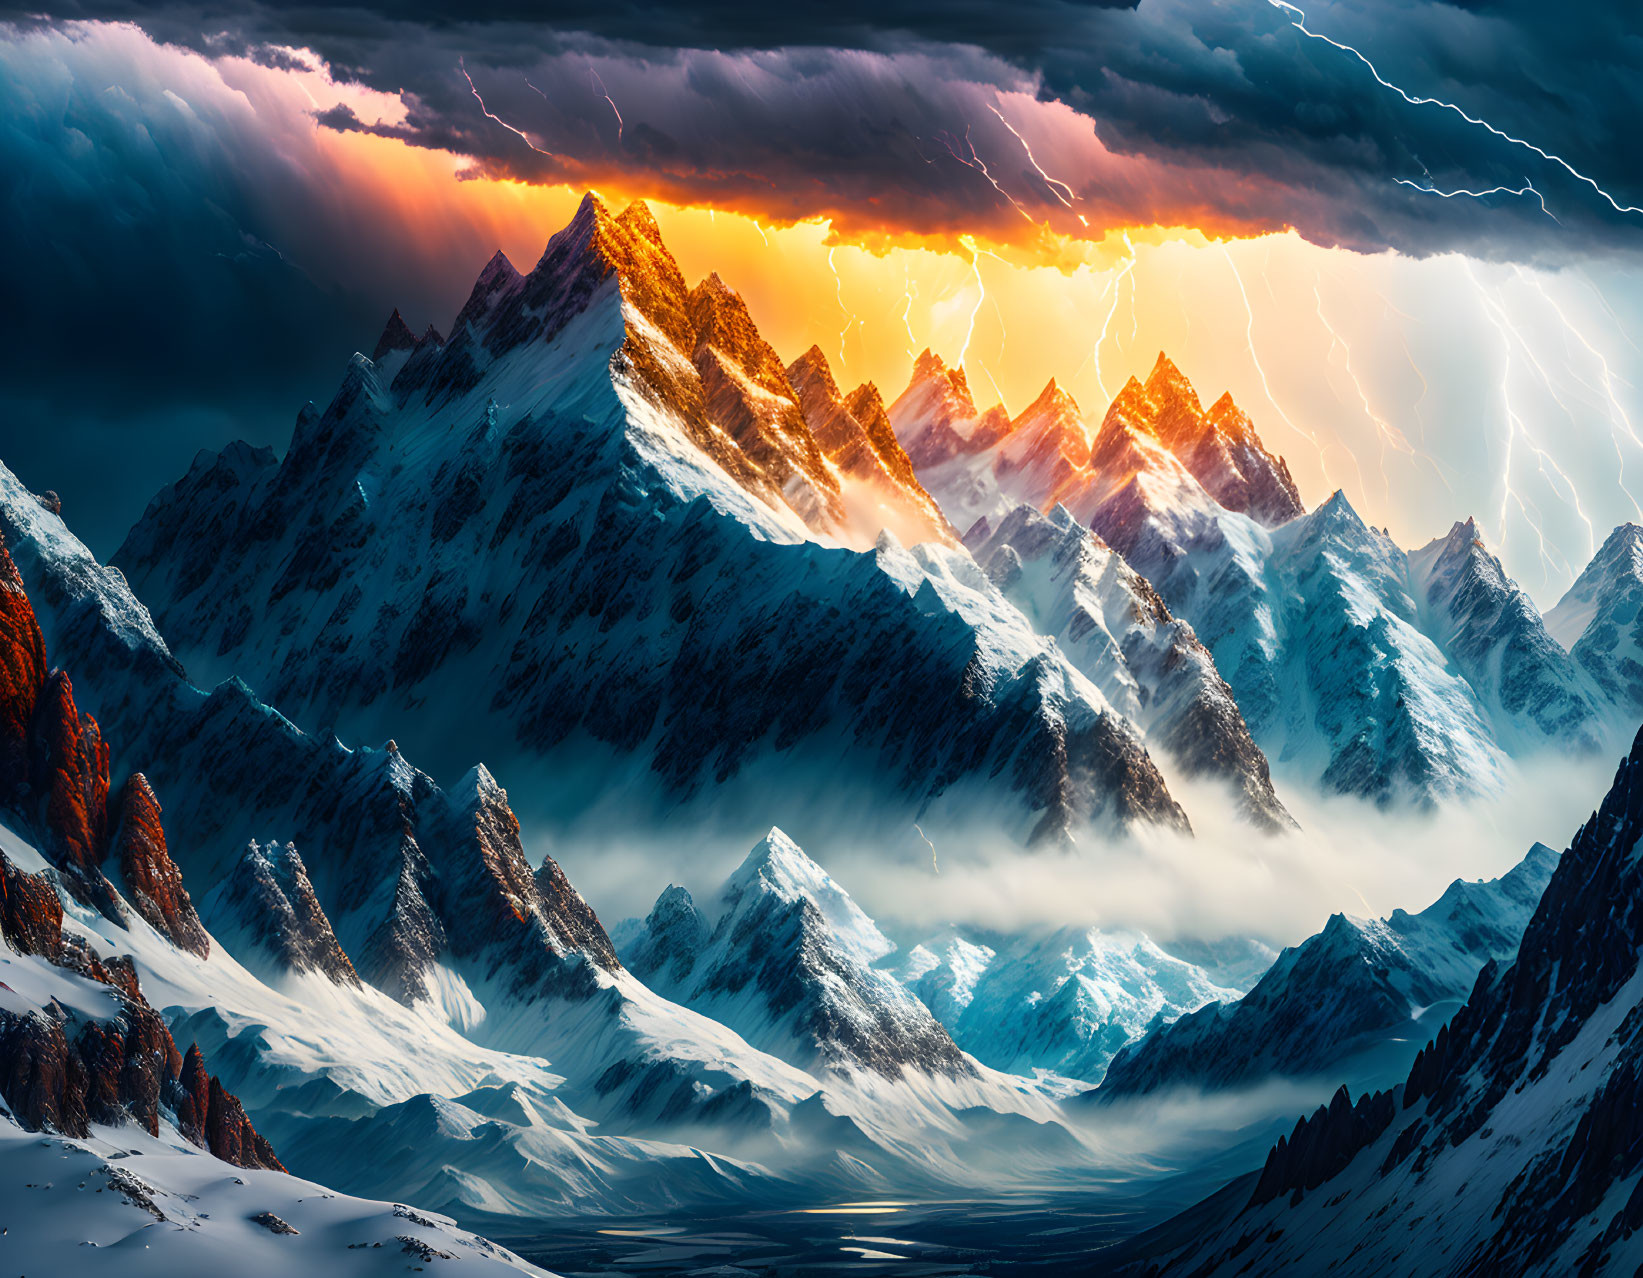 Snow-capped peaks in fiery sunset with lightning and misty valley